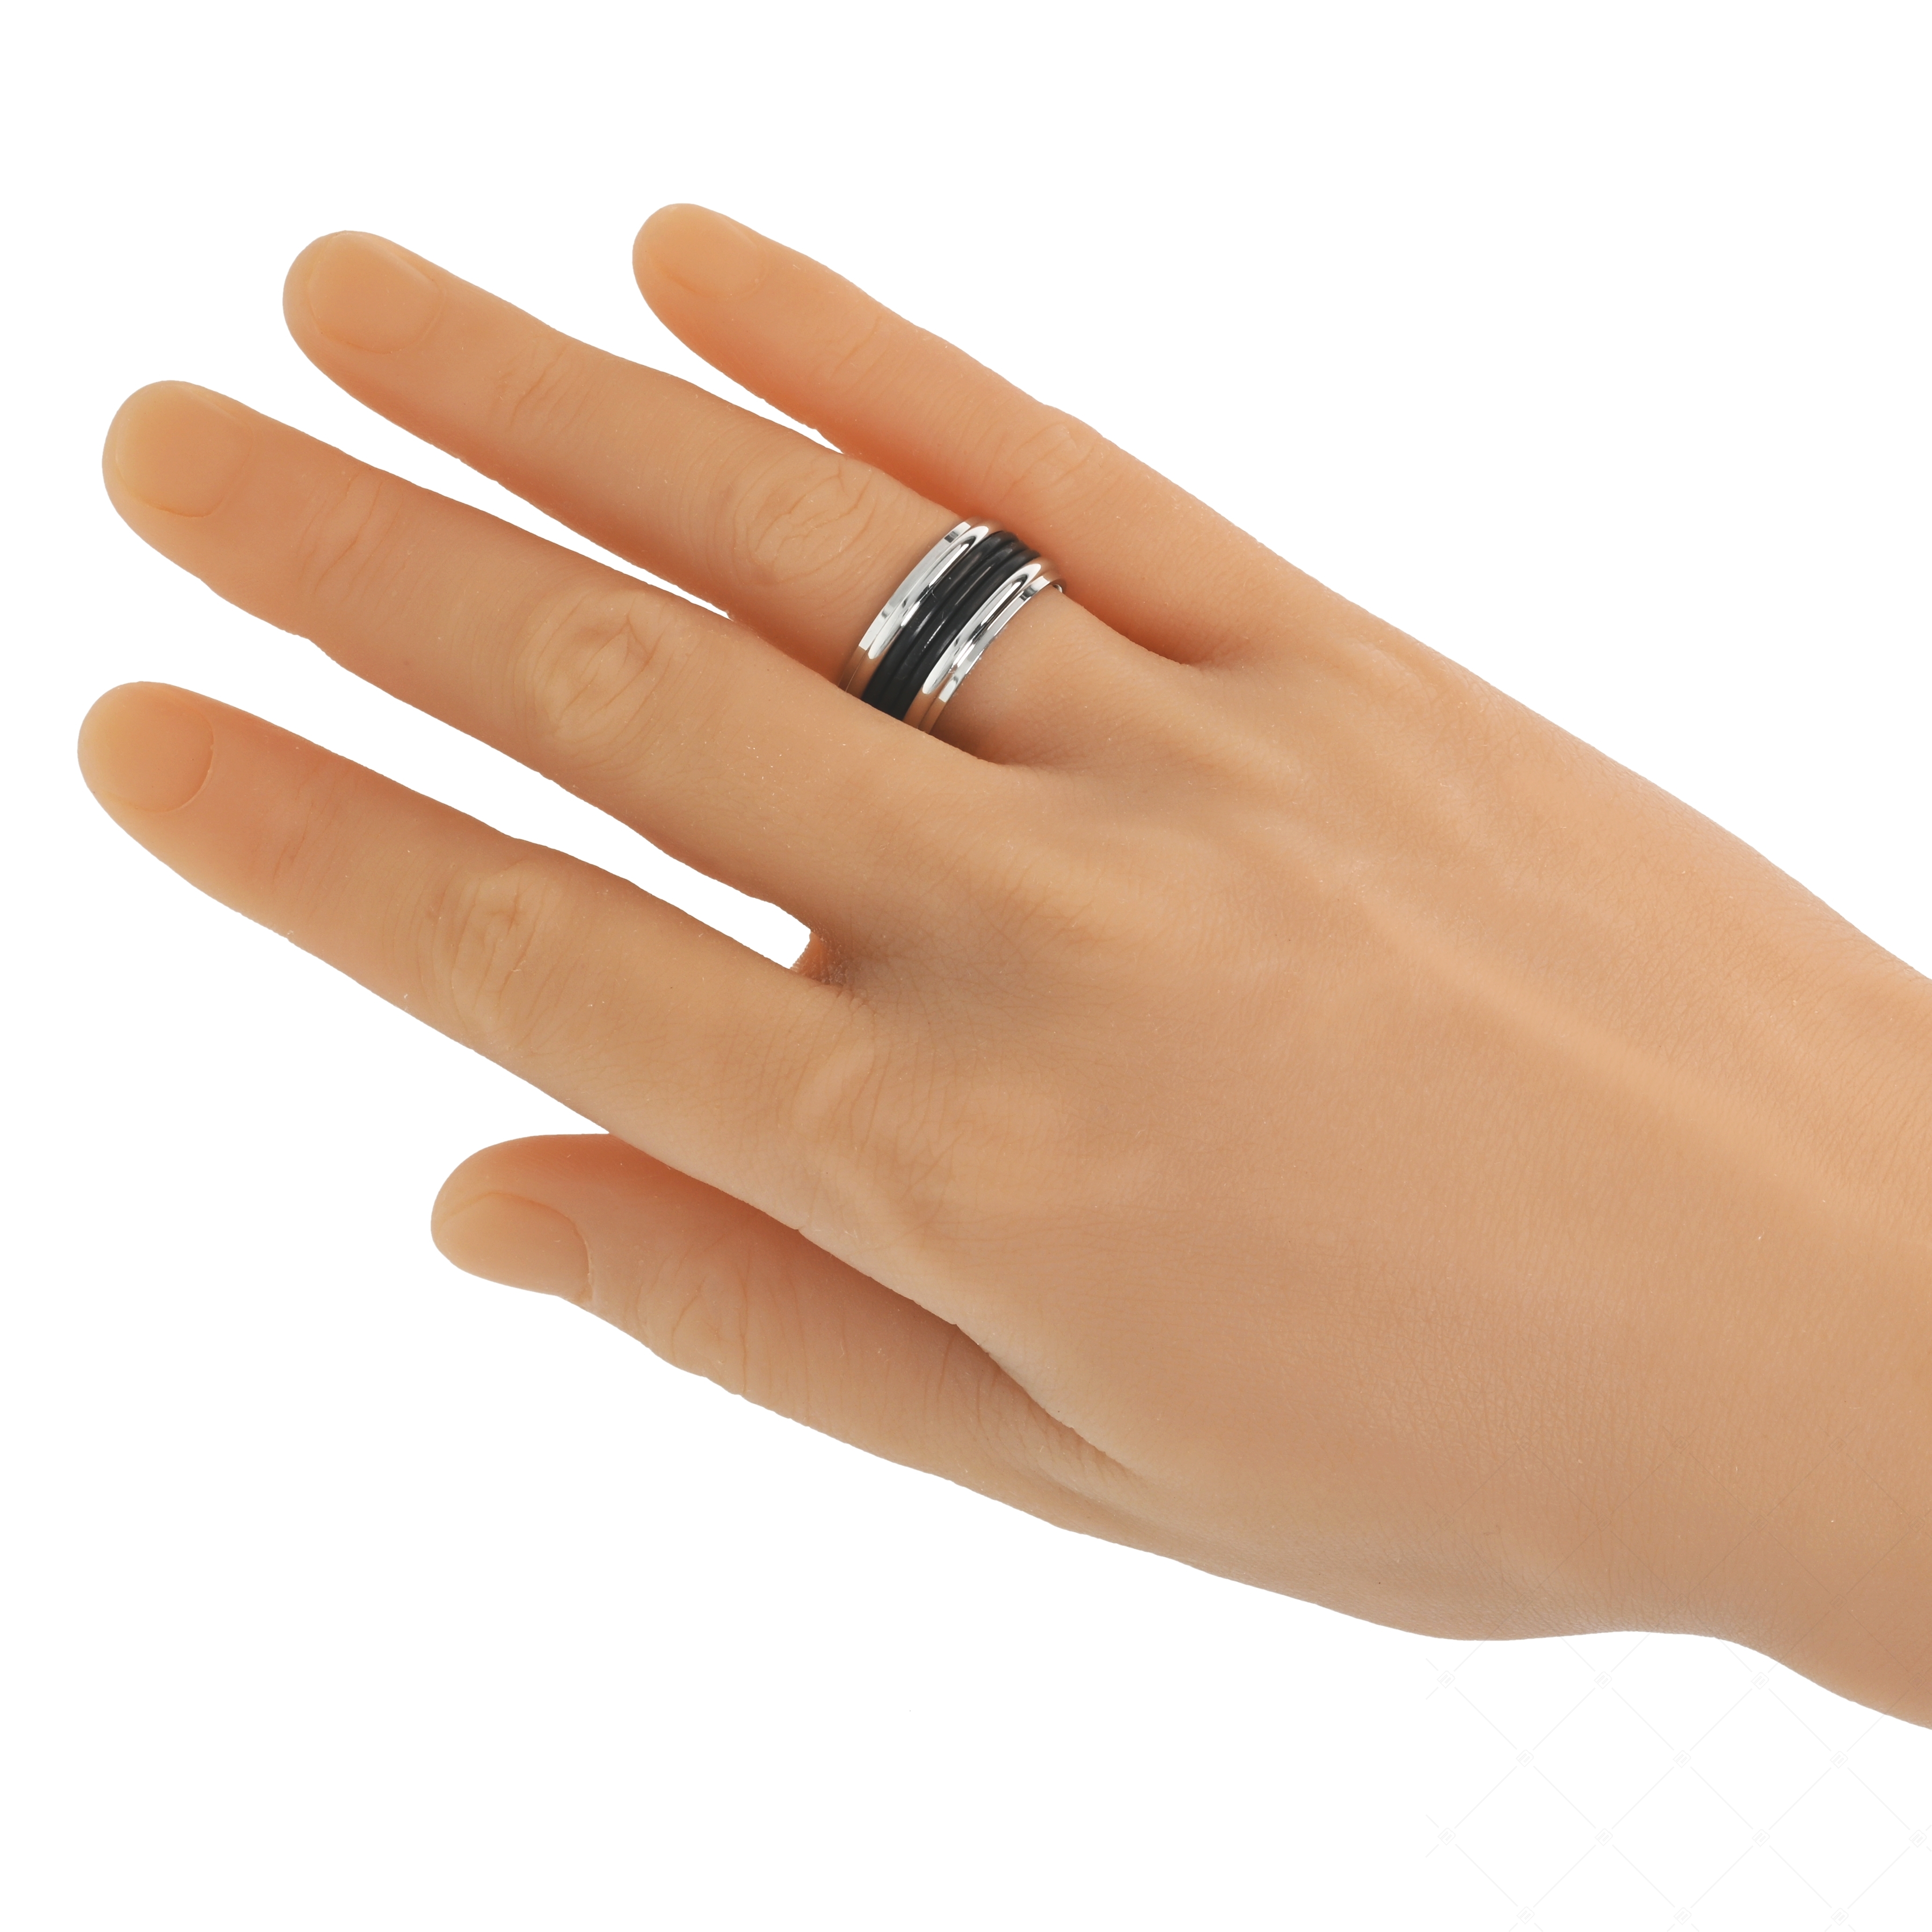 BALCANO - Galaxy / Stainless steel ring with rubber (042004BL99)